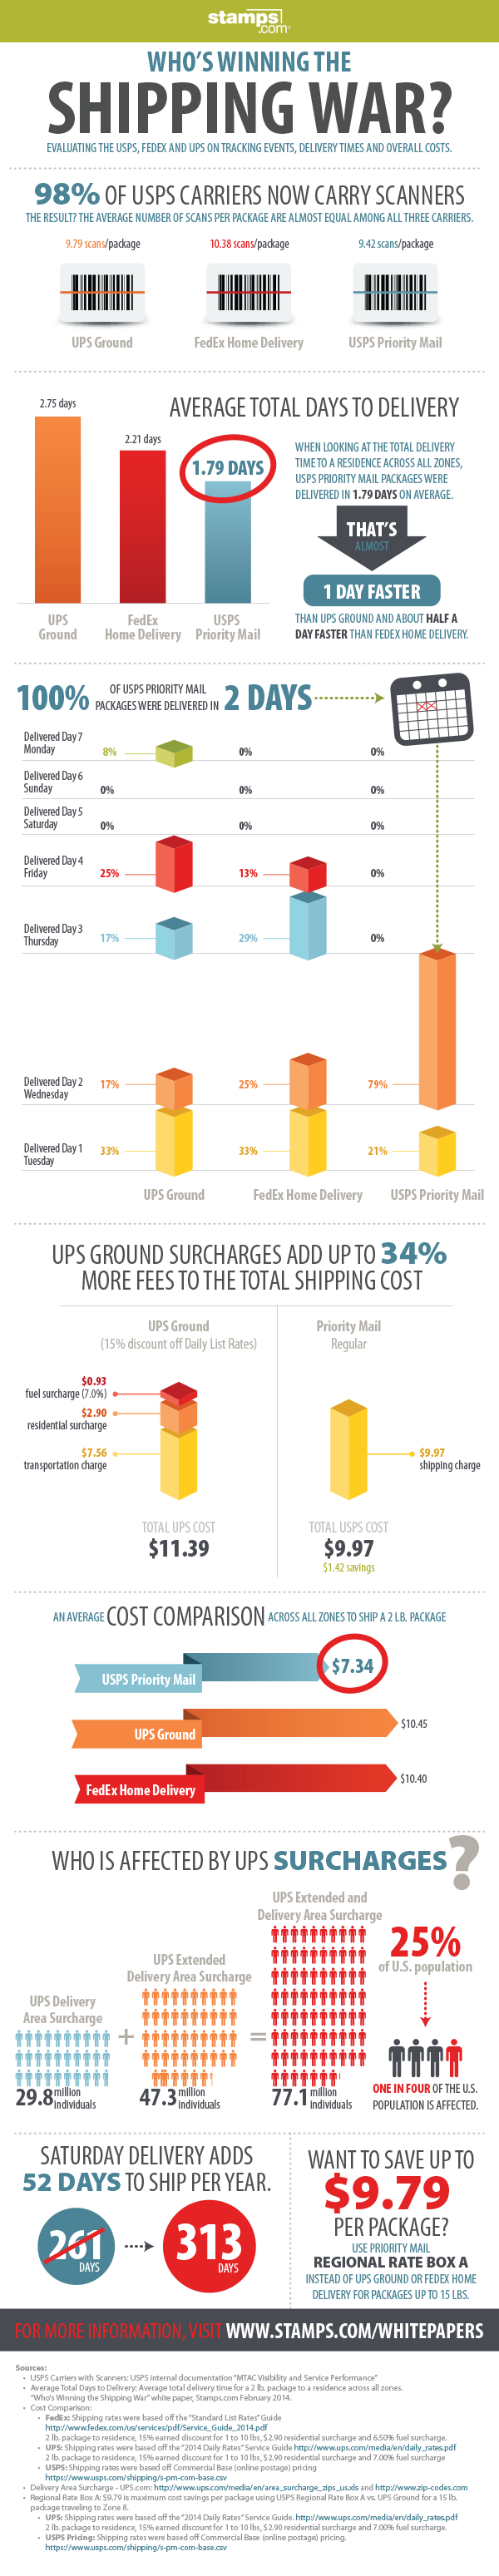 [Infographic] Shipping Carrier Comparison: UPS vs. FedEx vs. the USPS